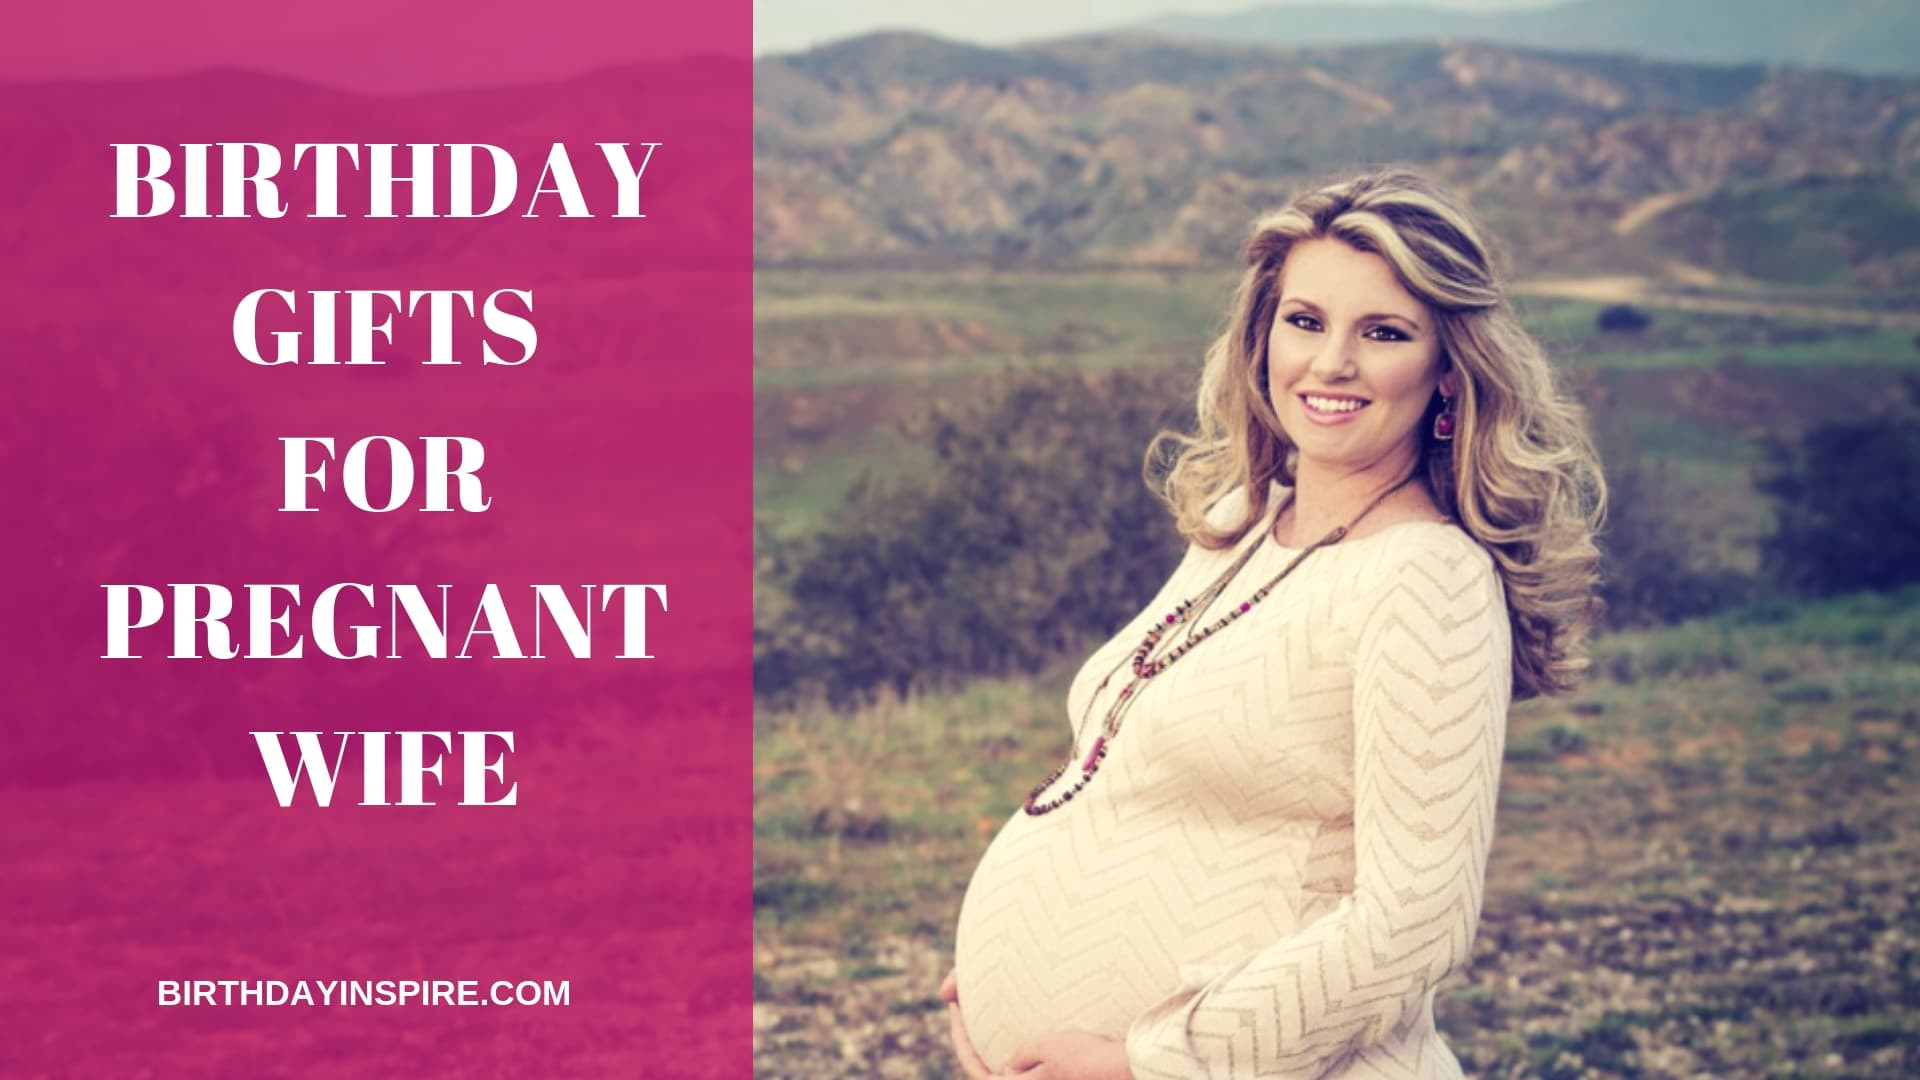 Birthday Gift Ideas For Pregnant Wife
 25 Useful Birthday Gifts For Pregnant Women